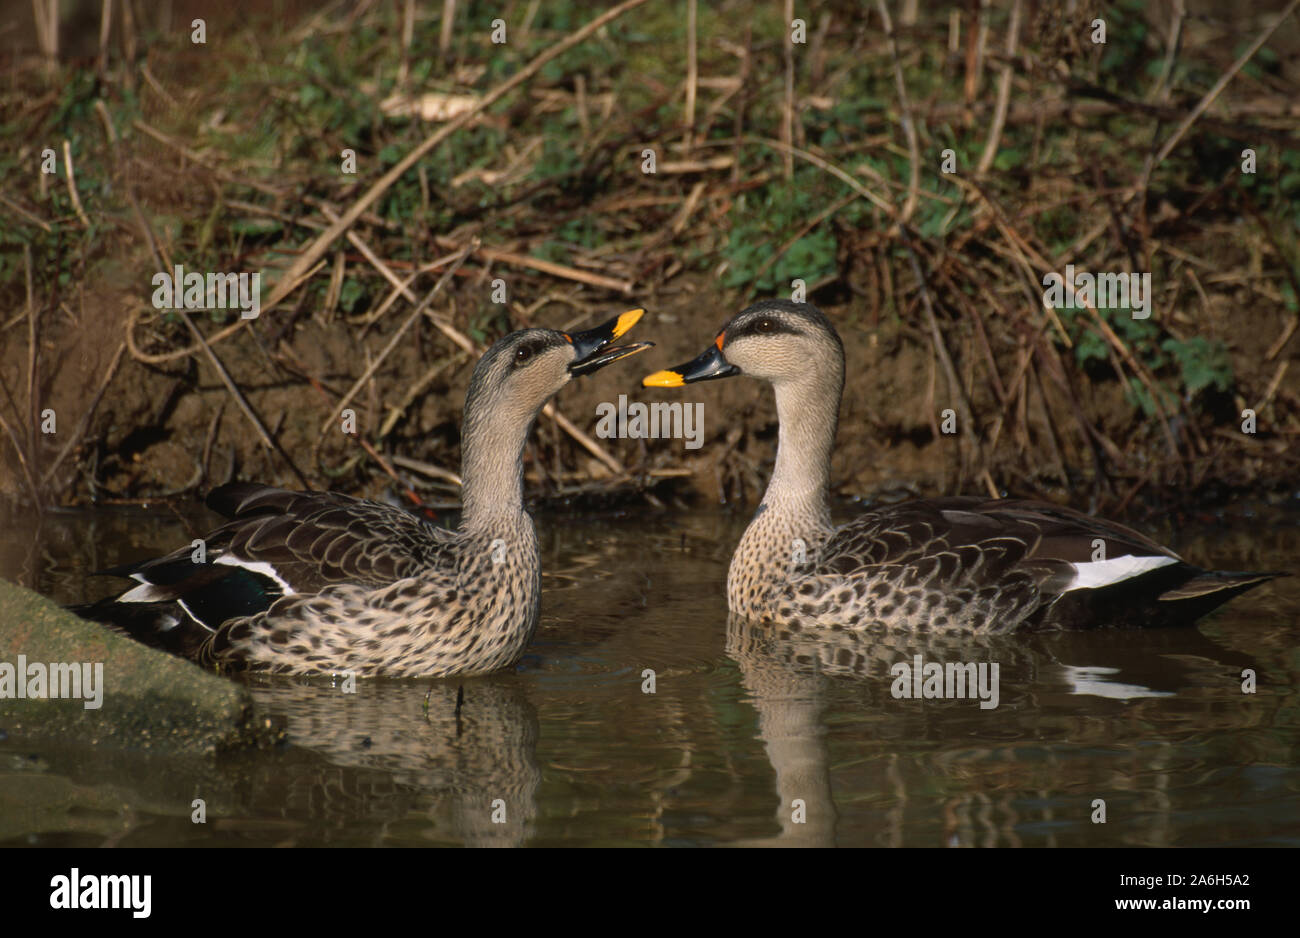 INDIAN SPOTBILL DUCK pair on water (Anas platyrhynchos poecilorhyncha).  Female (left) inciting male on right. Stock Photo